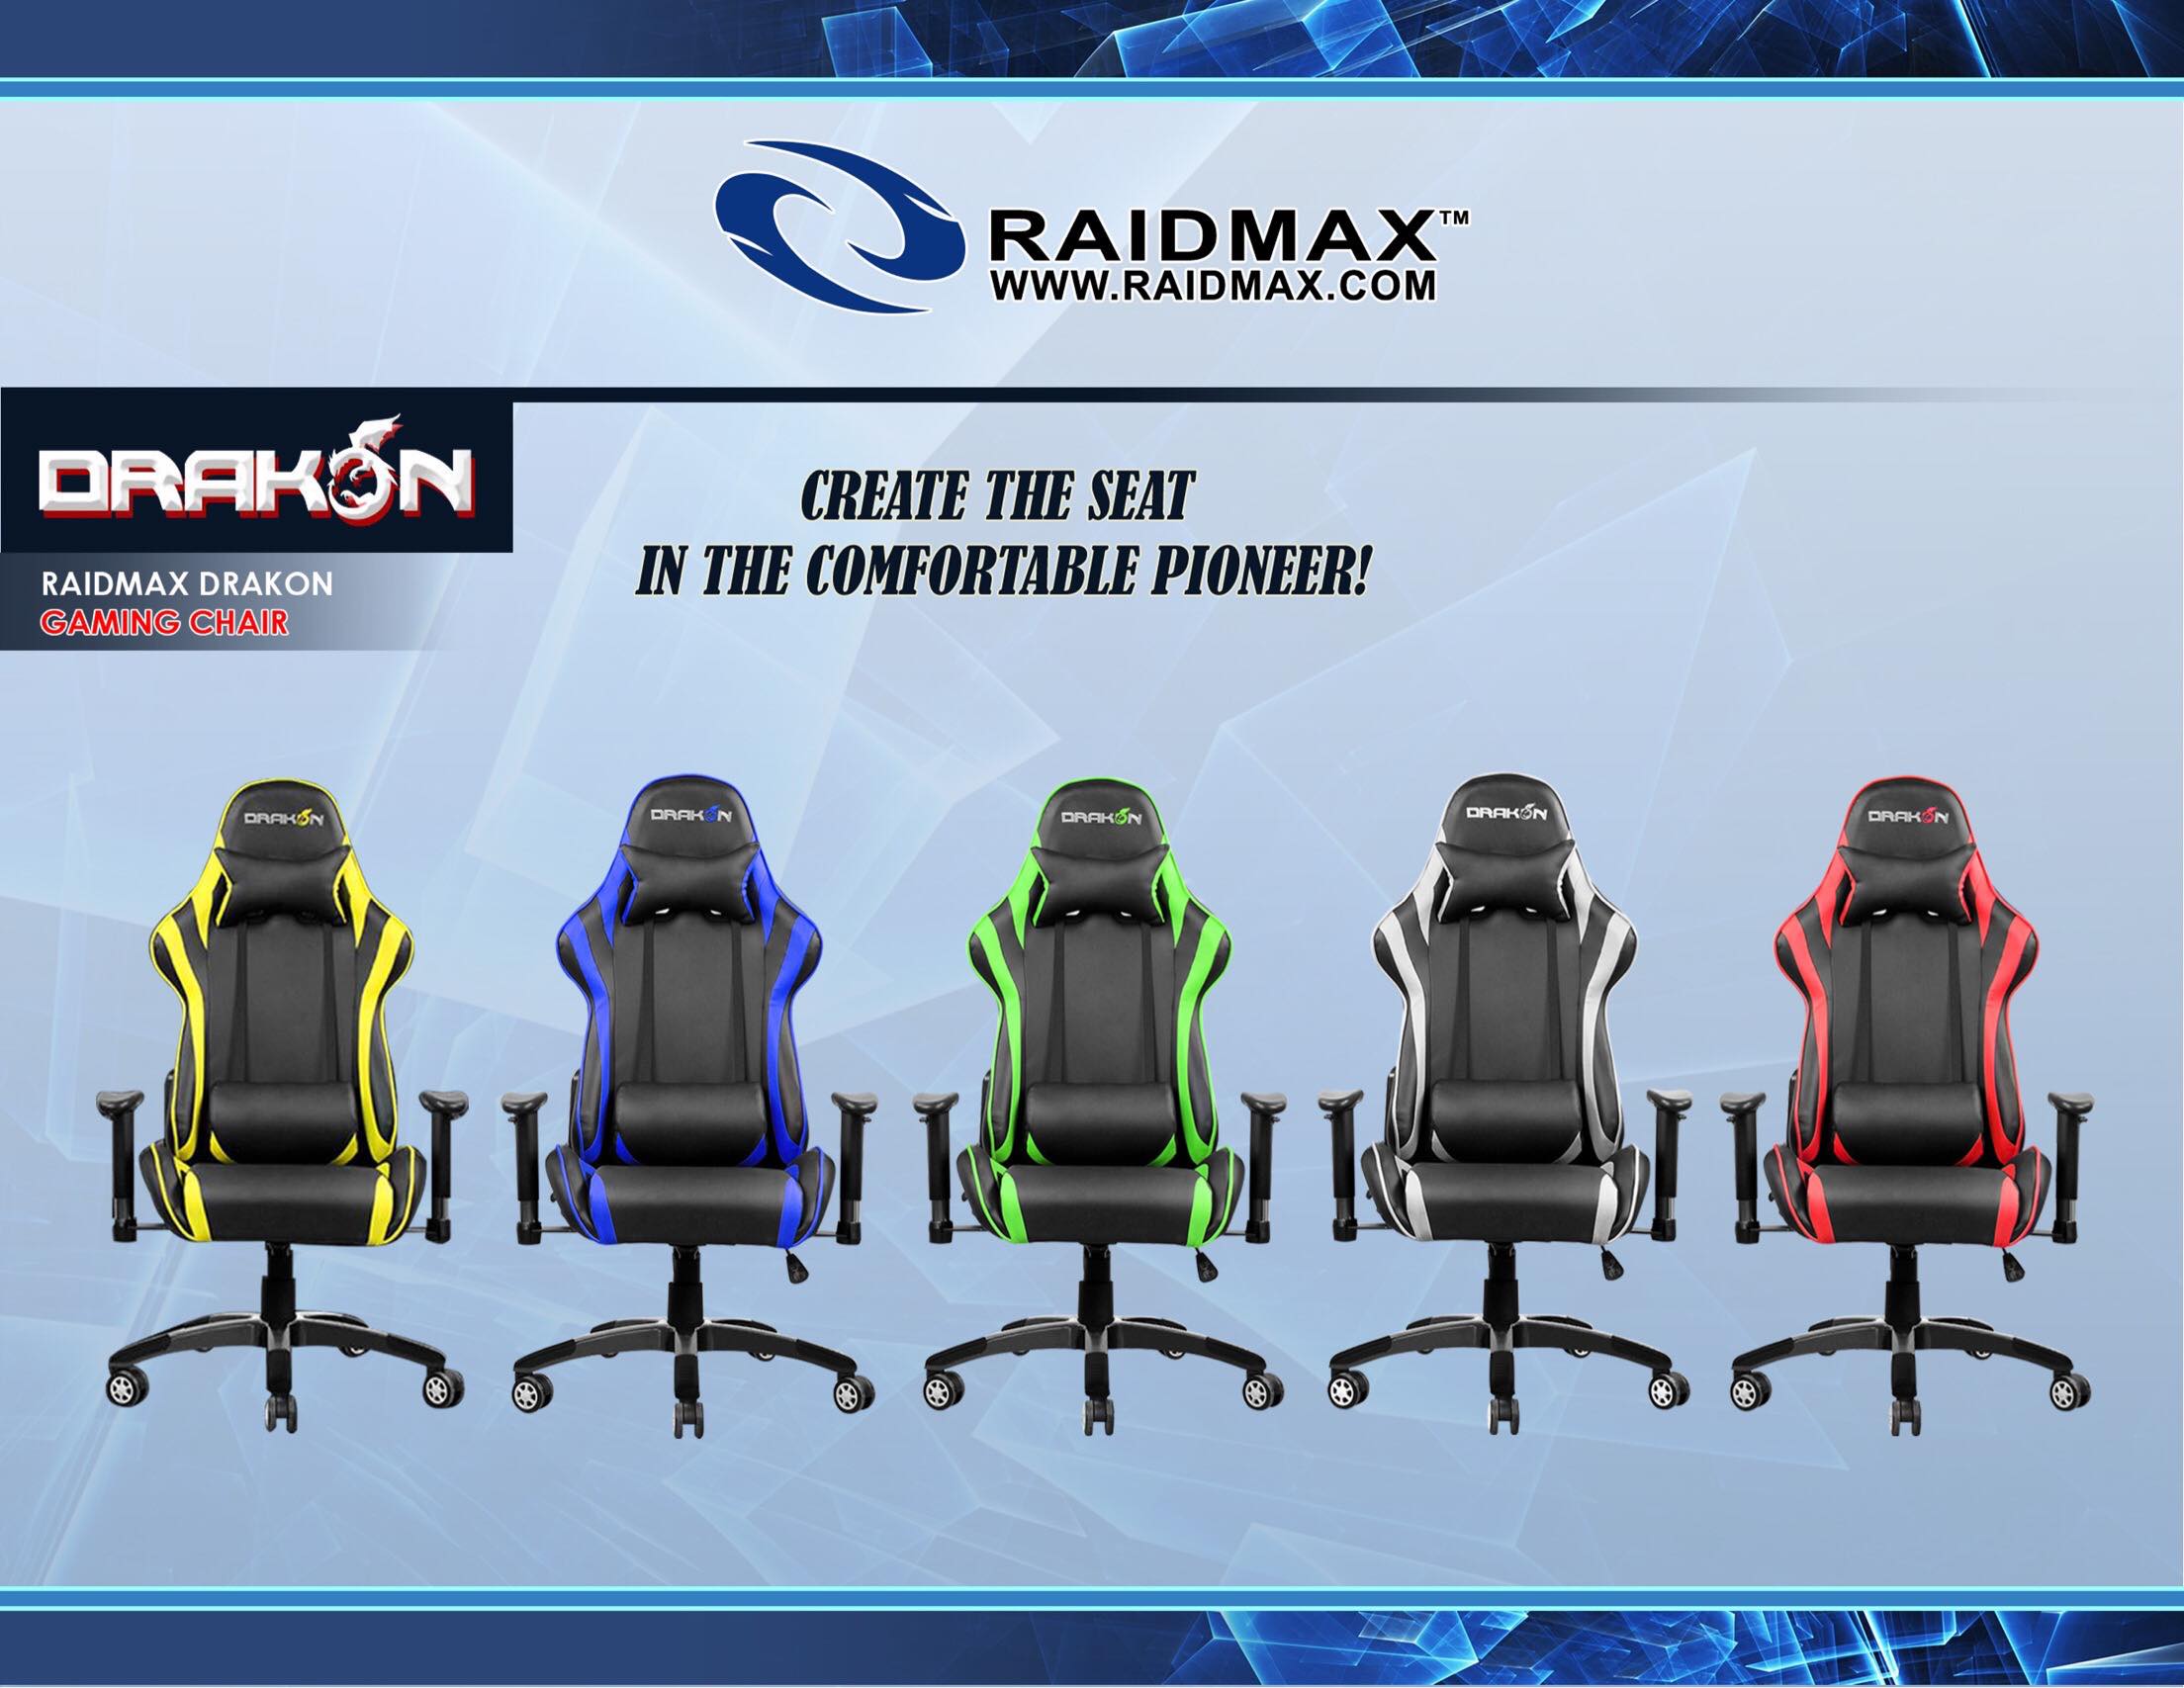 Raidmax Drakon Gaming Chairs Now Available In The Philippines Jam Online Philippines Tech News Reviews